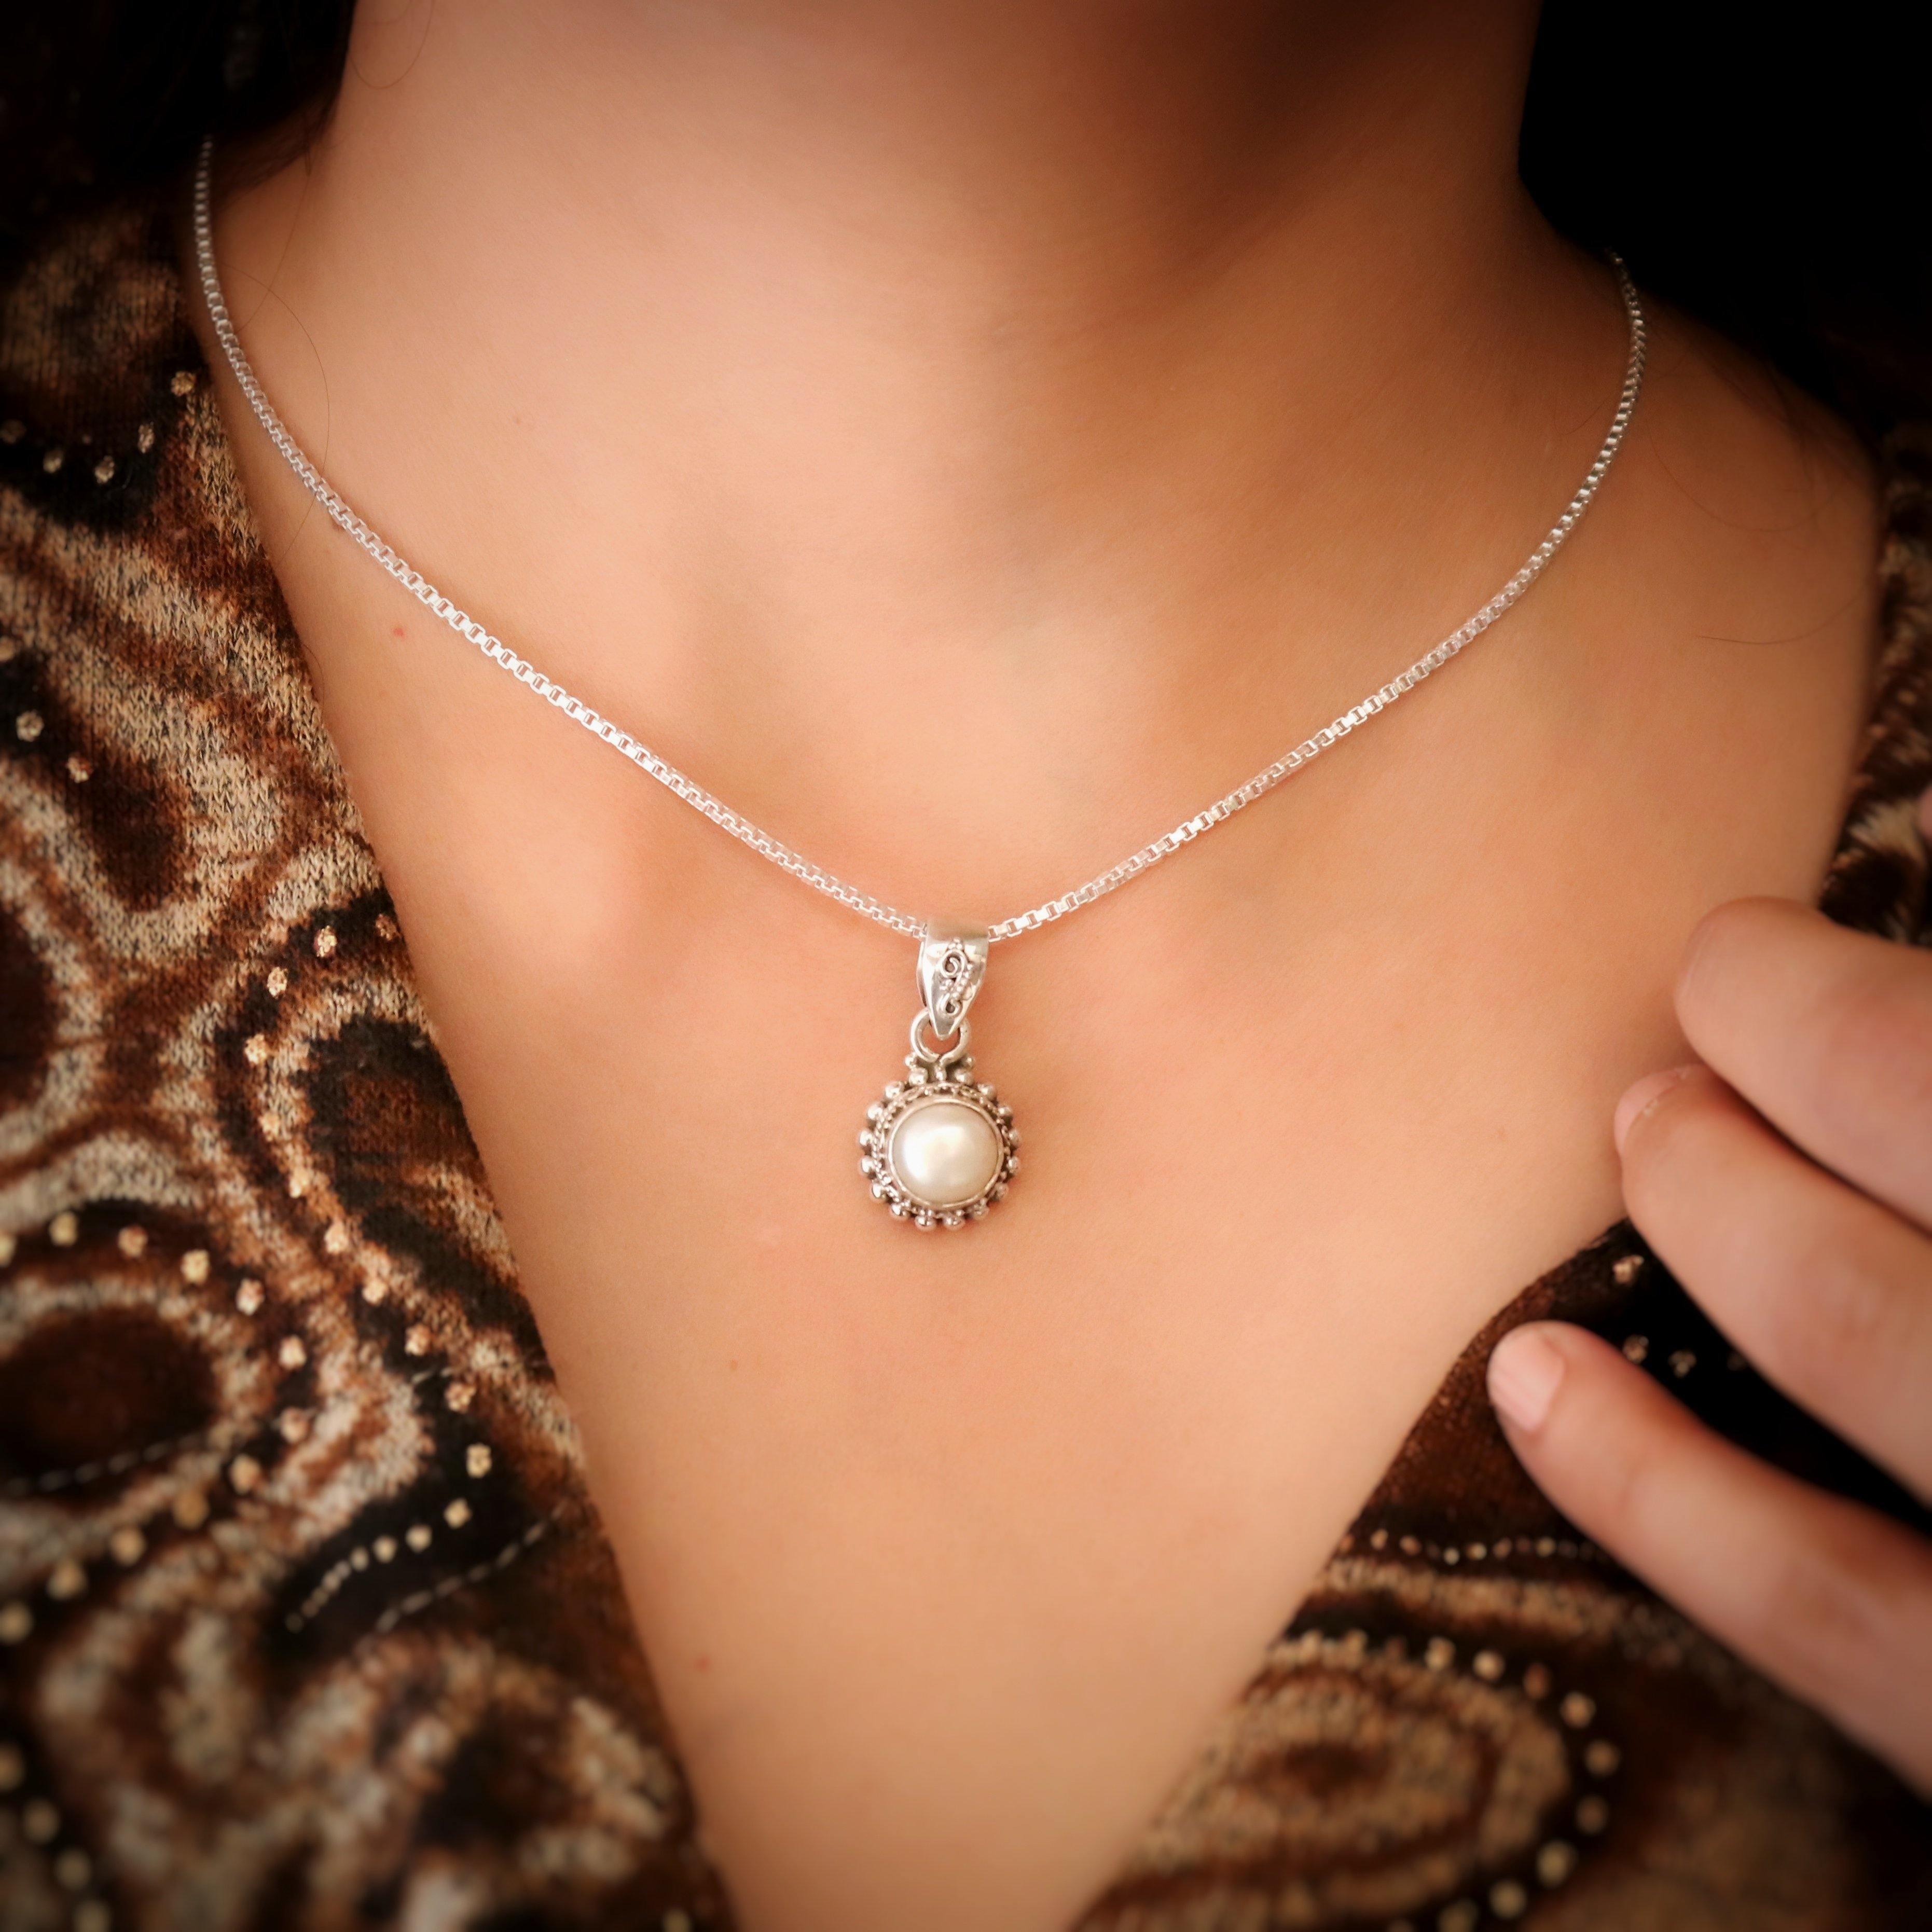 Ornate Jewels 925 Silver Sun Design Real Freshwater Cultured Pearl Pendant  Necklace with Chain Pearl Rhodium Plated Sterling Silver Necklace Price in  India - Buy Ornate Jewels 925 Silver Sun Design Real